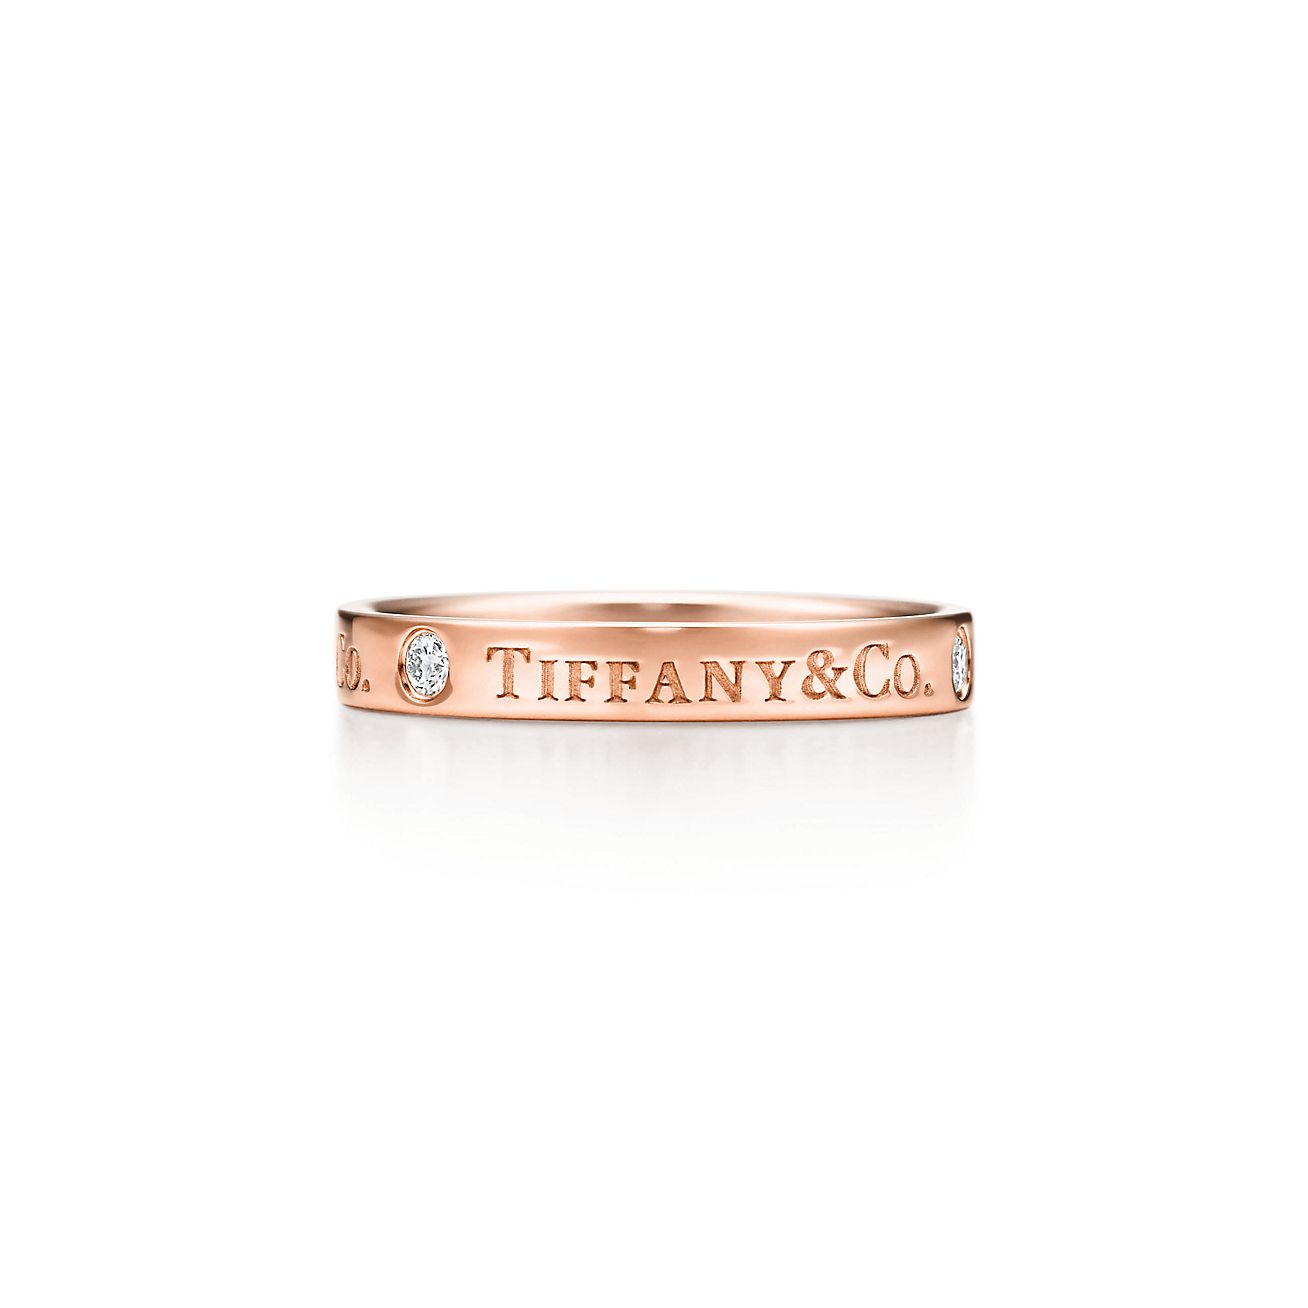 Tiffany & Co.® band ring in 18k rose gold with diamonds, 3 mm wide